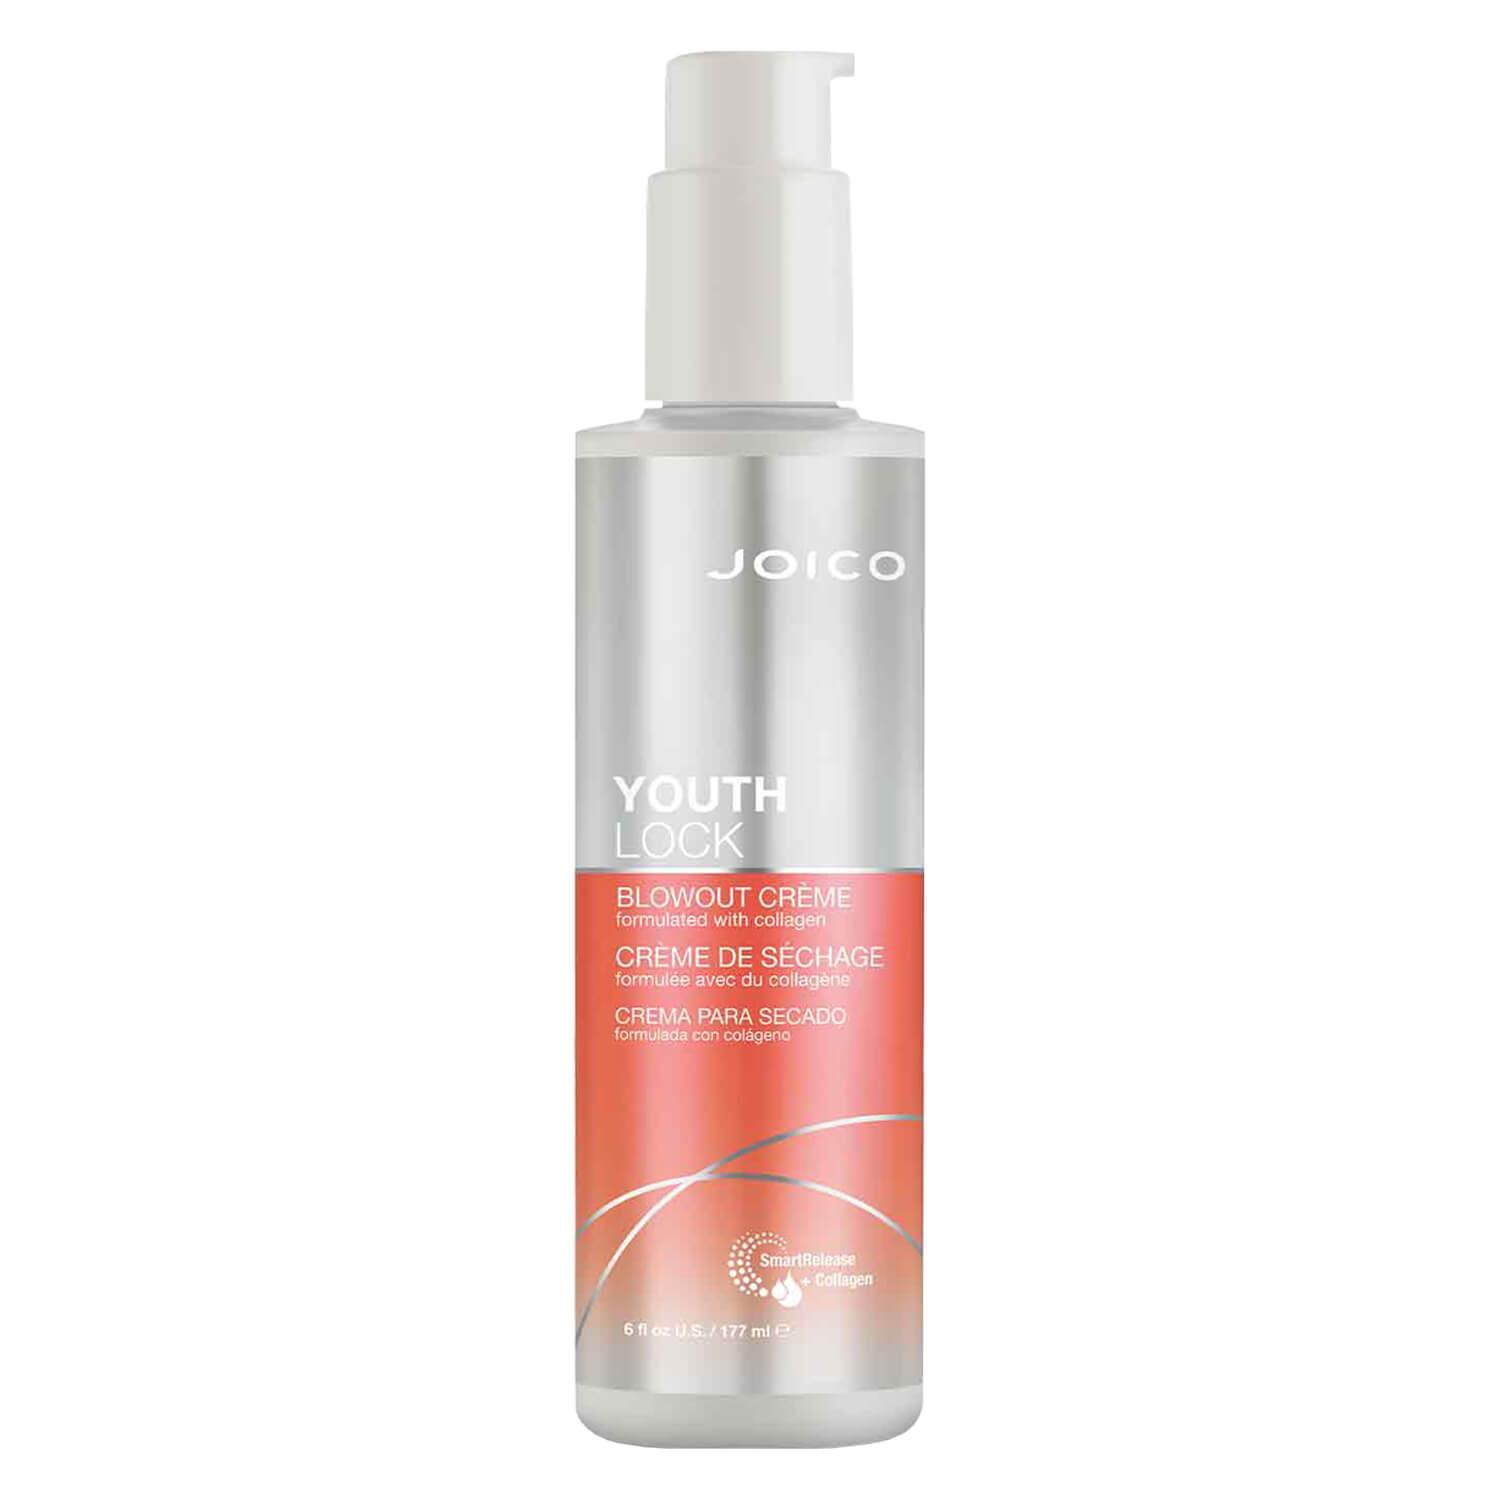 Youth Lock - Blowout Crème